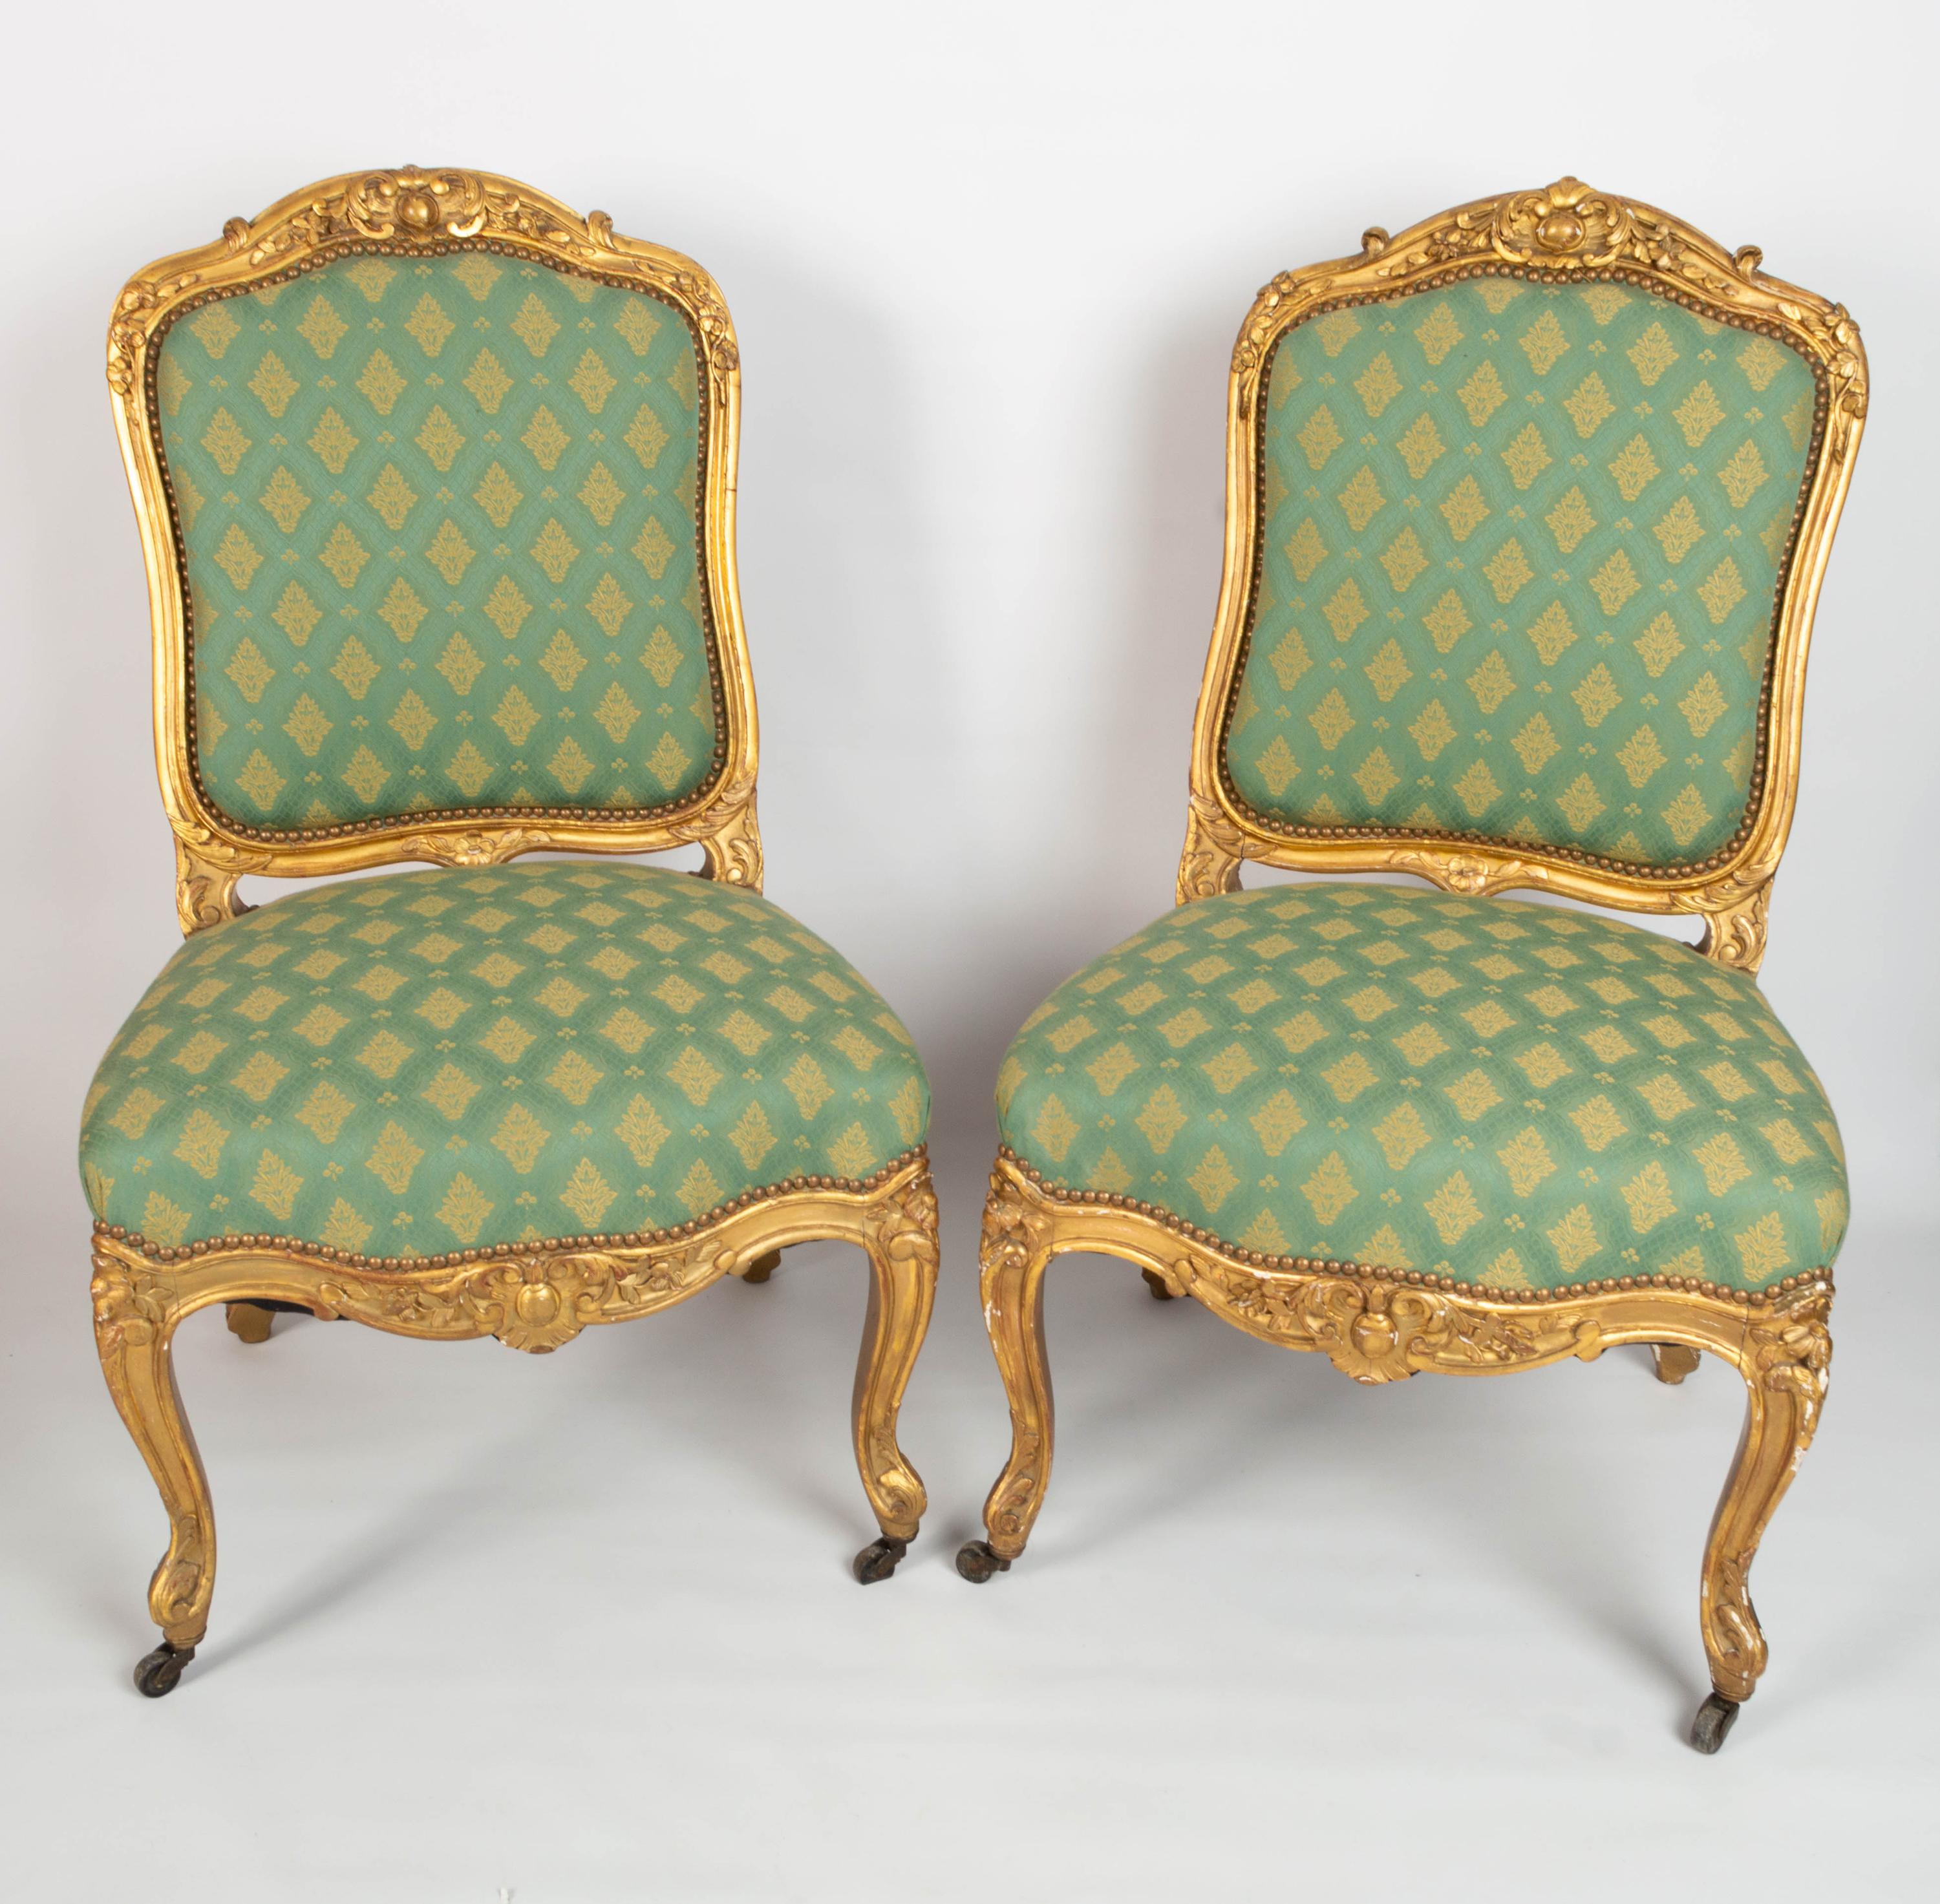 Pair Antique French 19th century Louis XV Style Giltwood salon chairs

A superb pair of Louis XV-style gilt wood salon chairs.
c.1870, France.
Each chair traditionally upholstered in a woven green fabric.

Solid and sturdy chairs, presented in